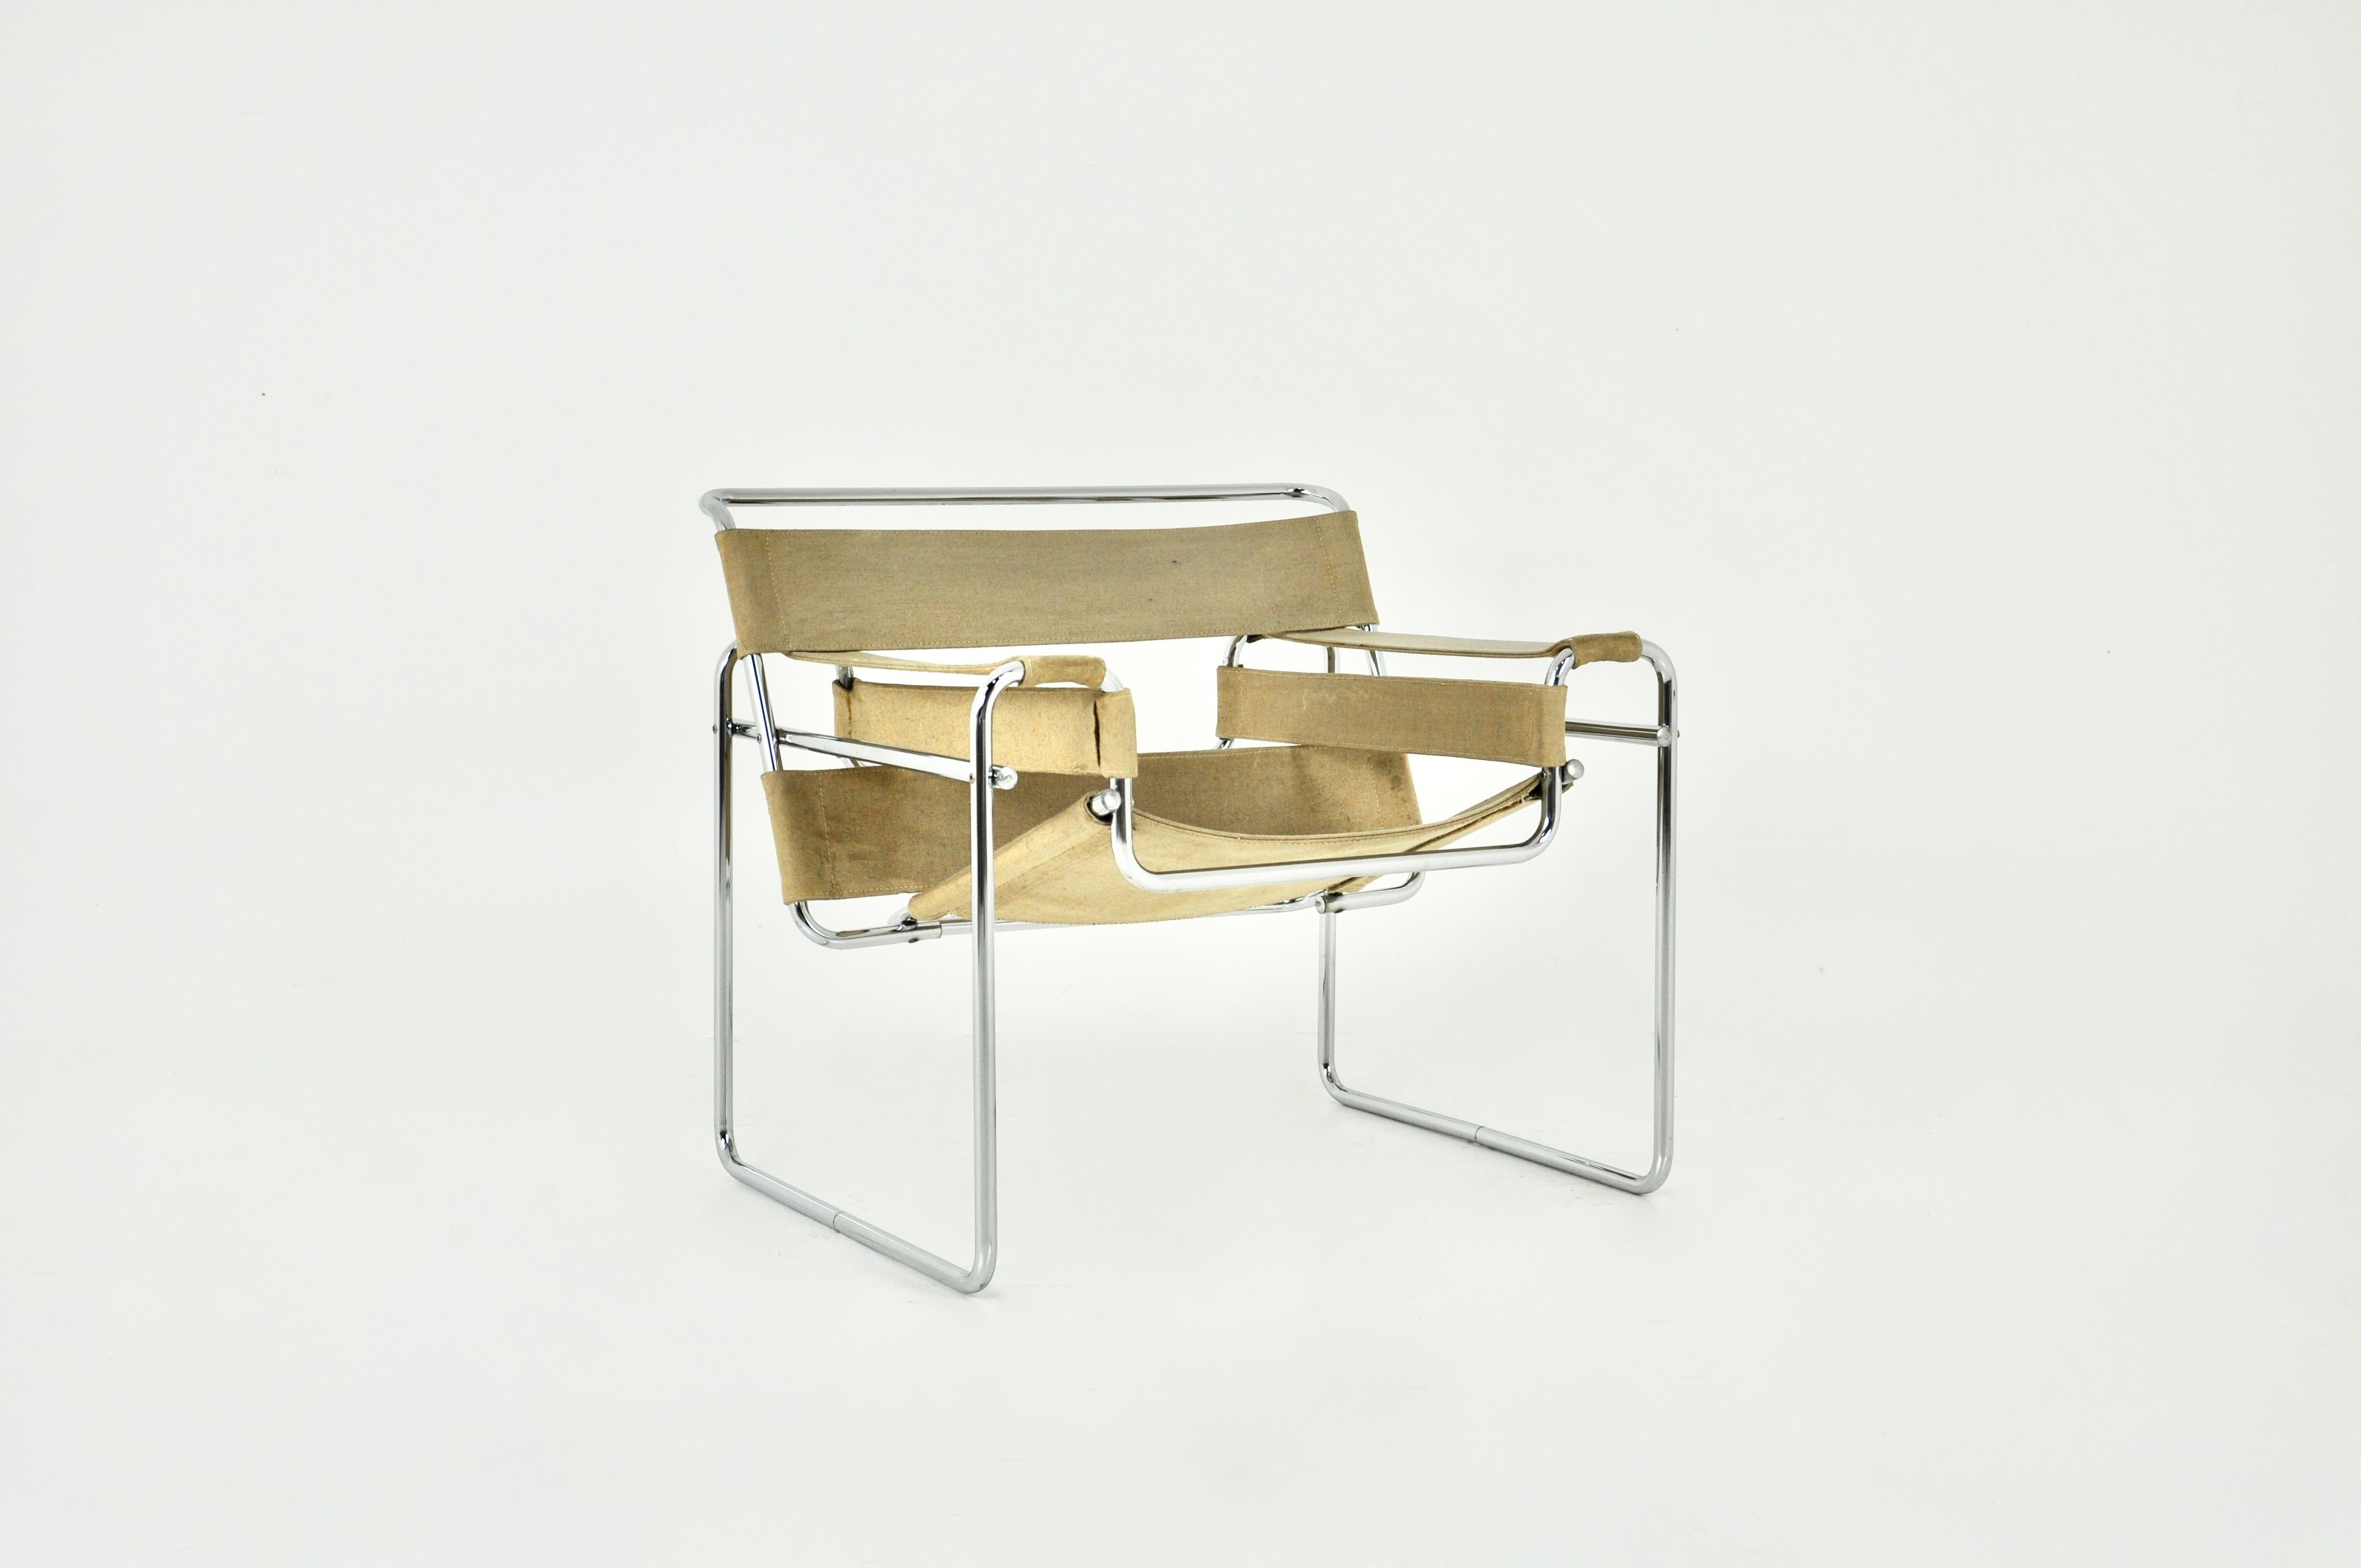 Armchair in Chromed metal and beige canvas . Seat height: 41 cm. Wear due to time and age of the chair.